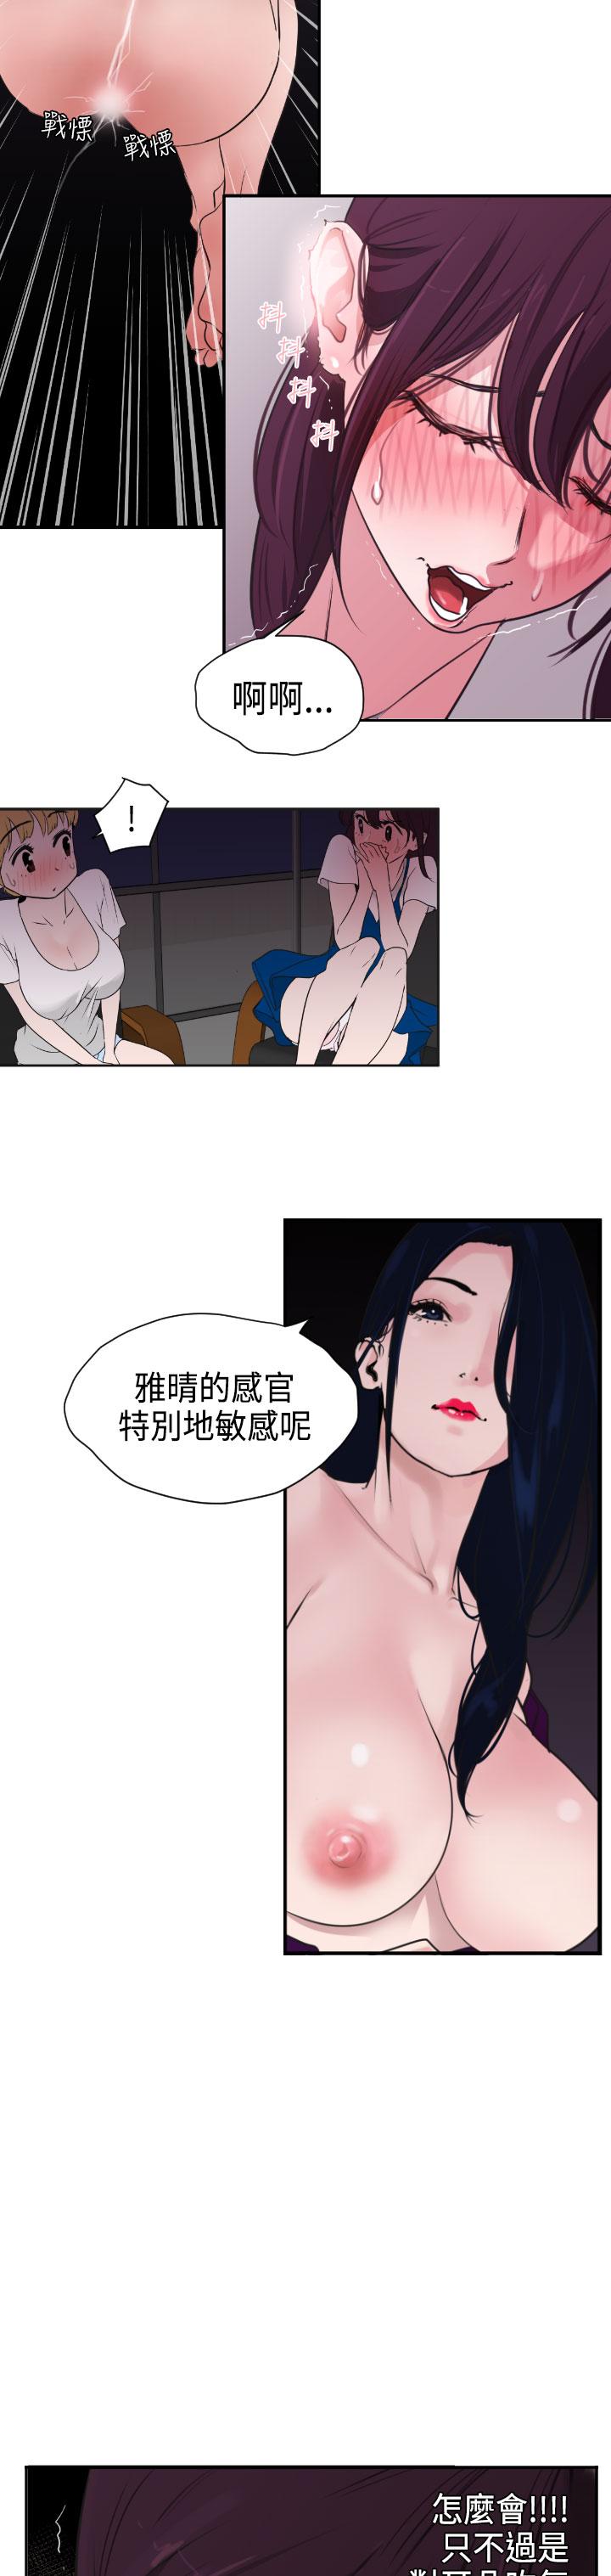 Desire King (慾求王) Ch.1-4 (chinese) 101